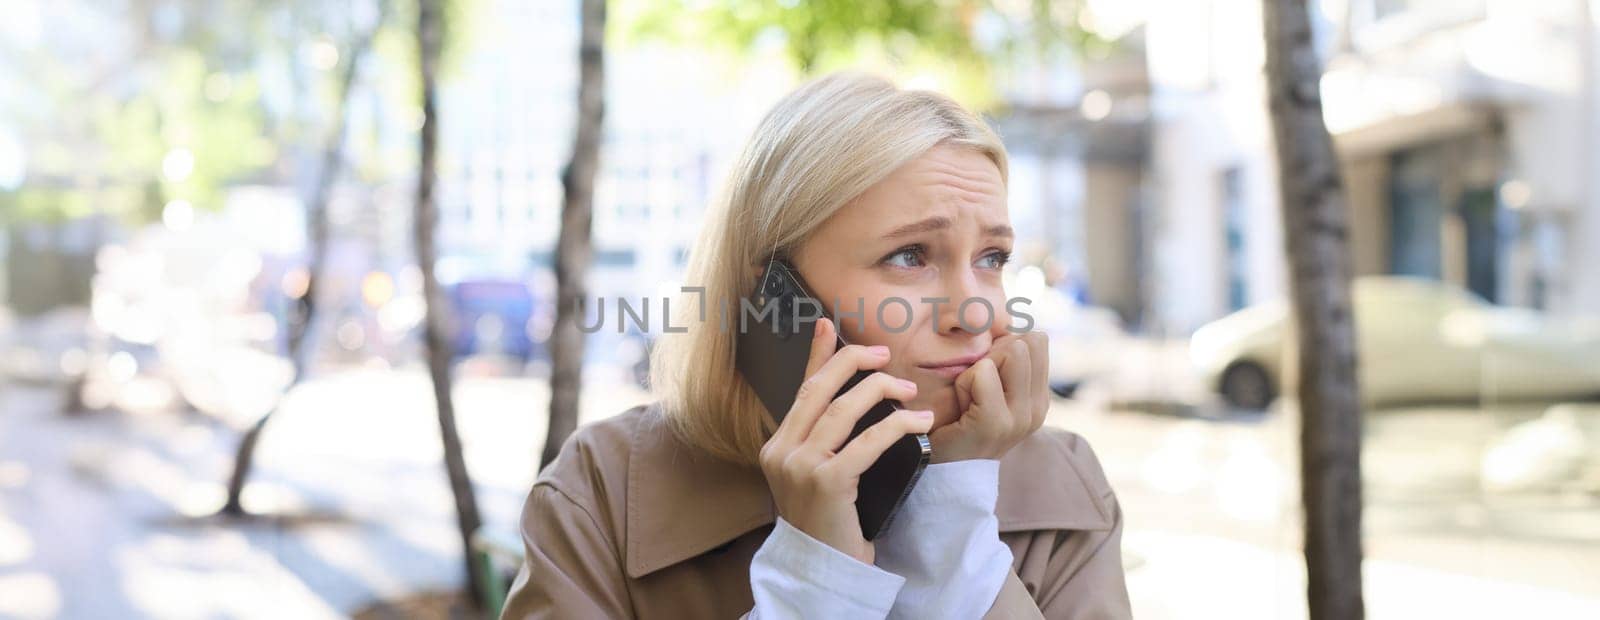 Image of young stressed, upset woman, talking on mobile phone with worried face expression, has difficult conversation over the telephone, sitting in outdoor cafe.